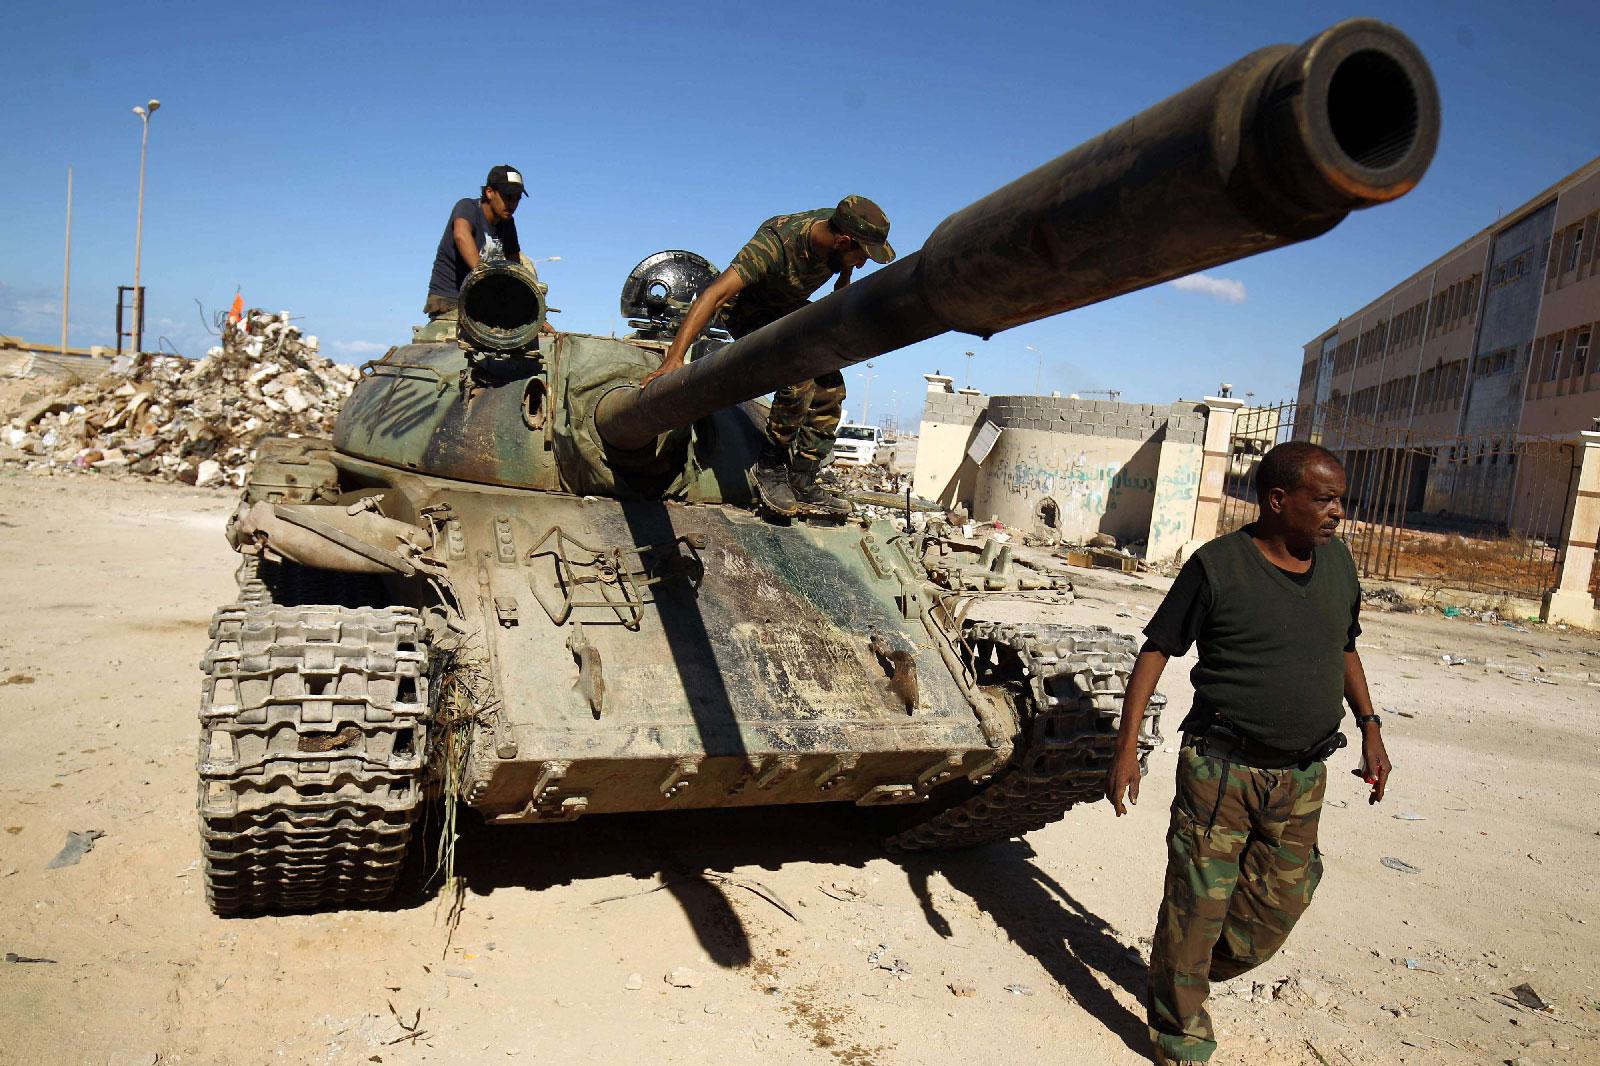 Members of the Libyan National Army ride on a tank.